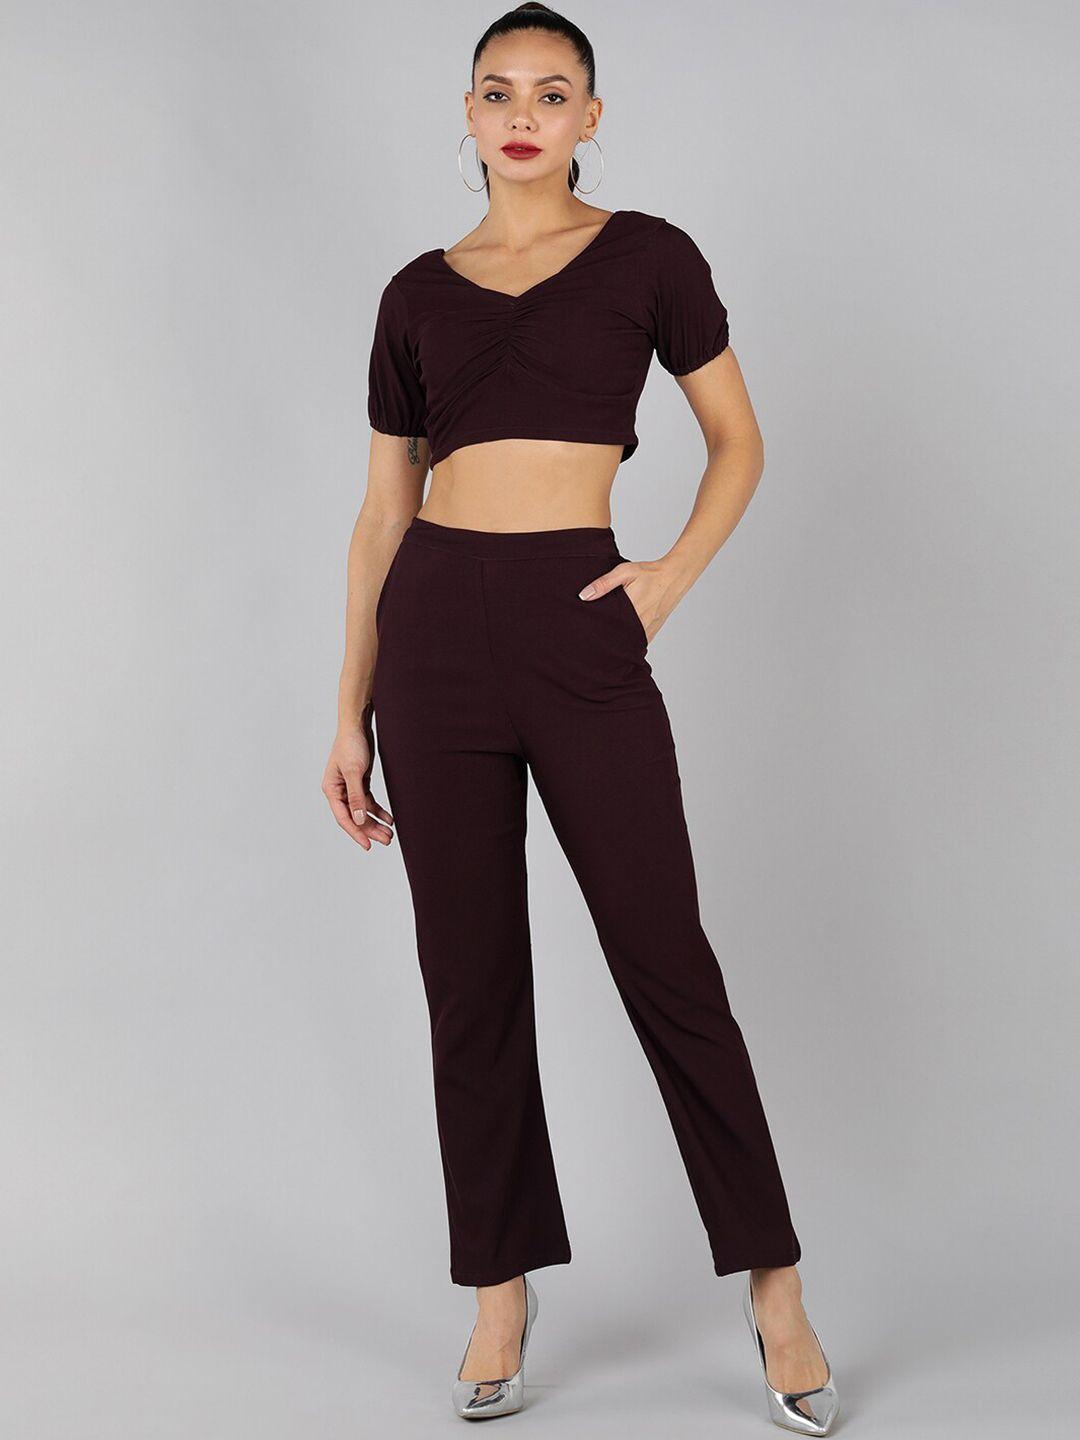 golden kite crop top with trousers